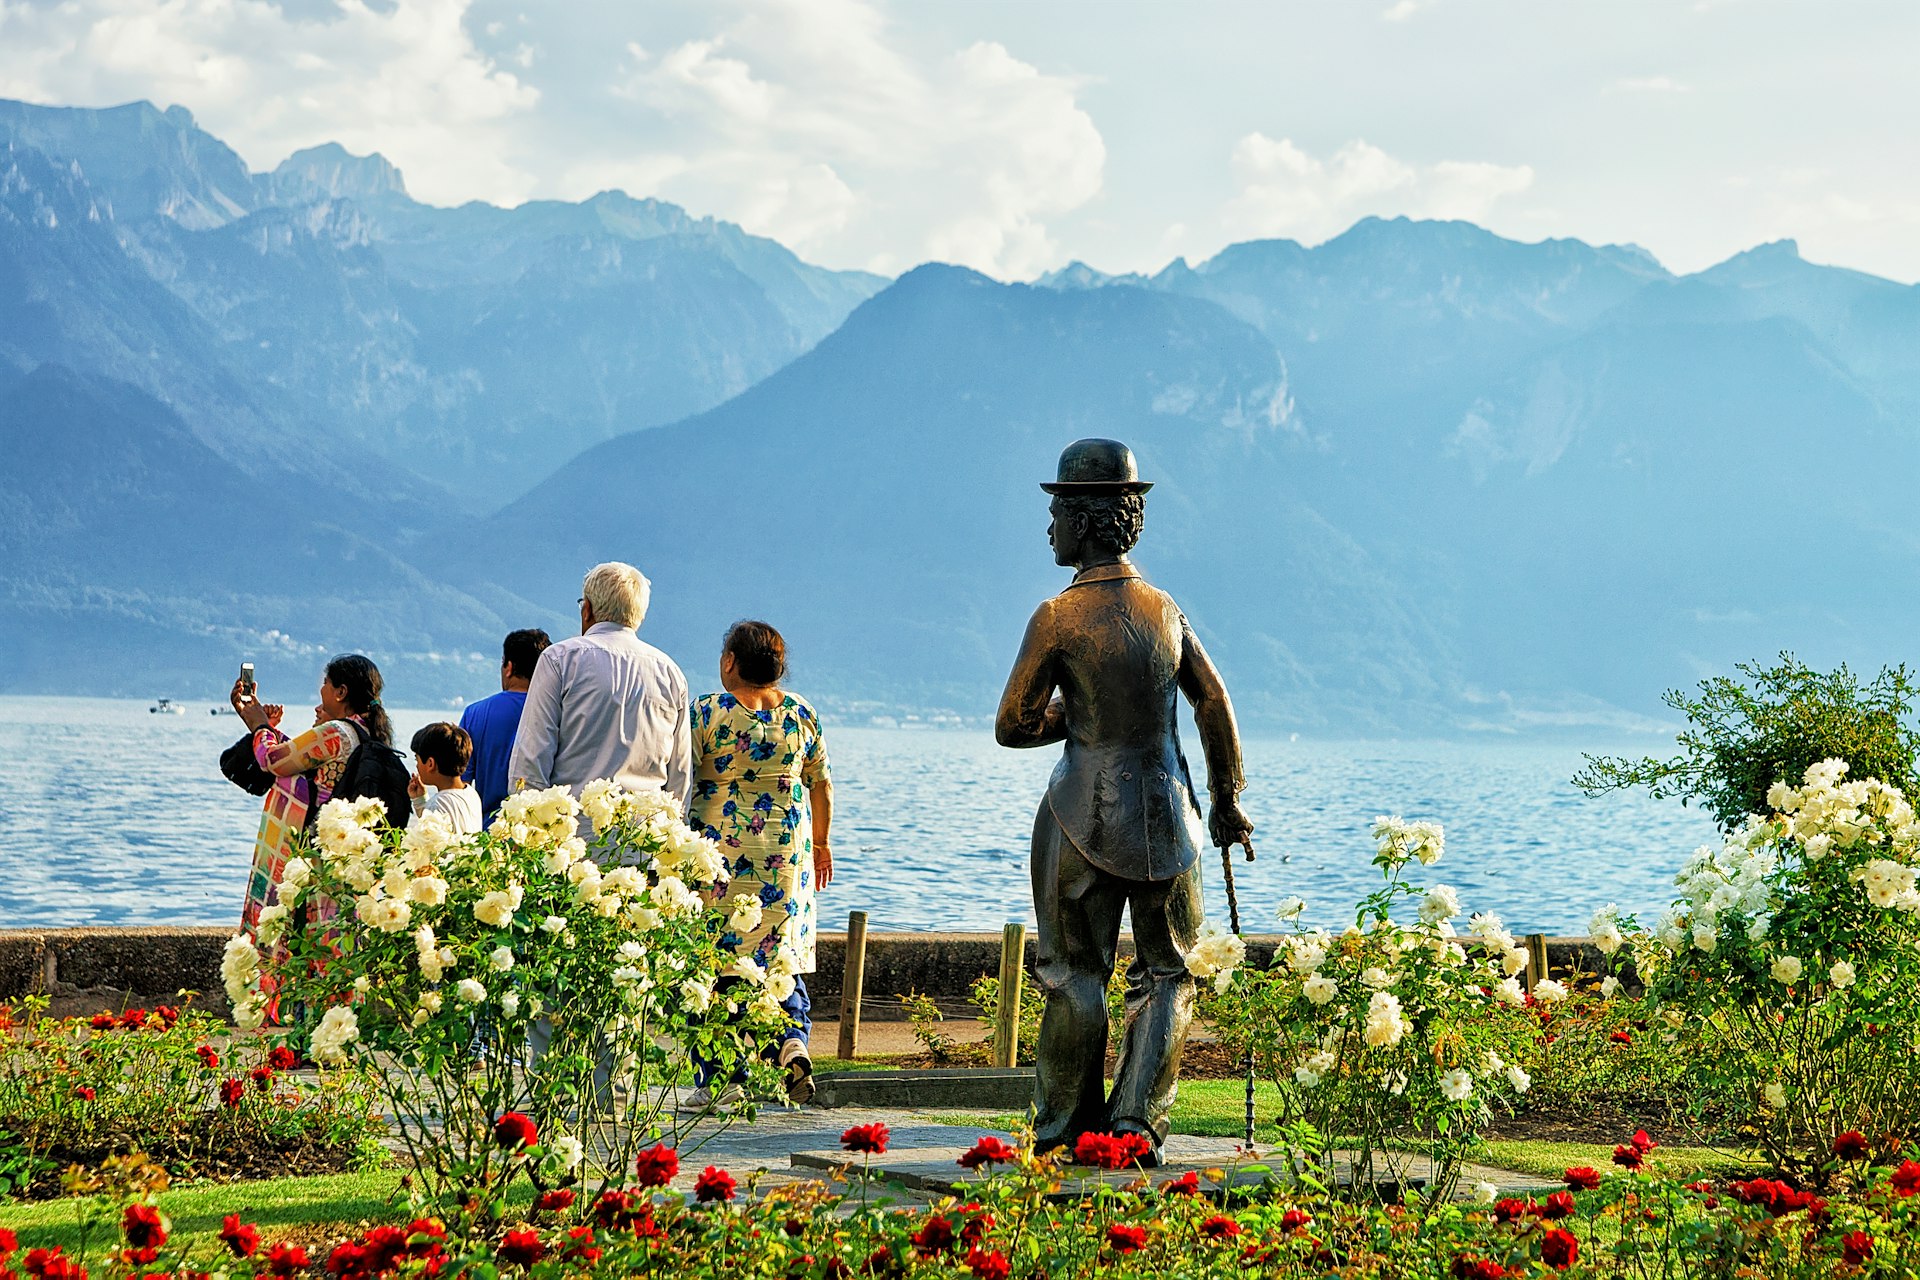 A Charlie Chaplin statue in Vevey overlooks a group of tourists standing in front of Lake Geneva